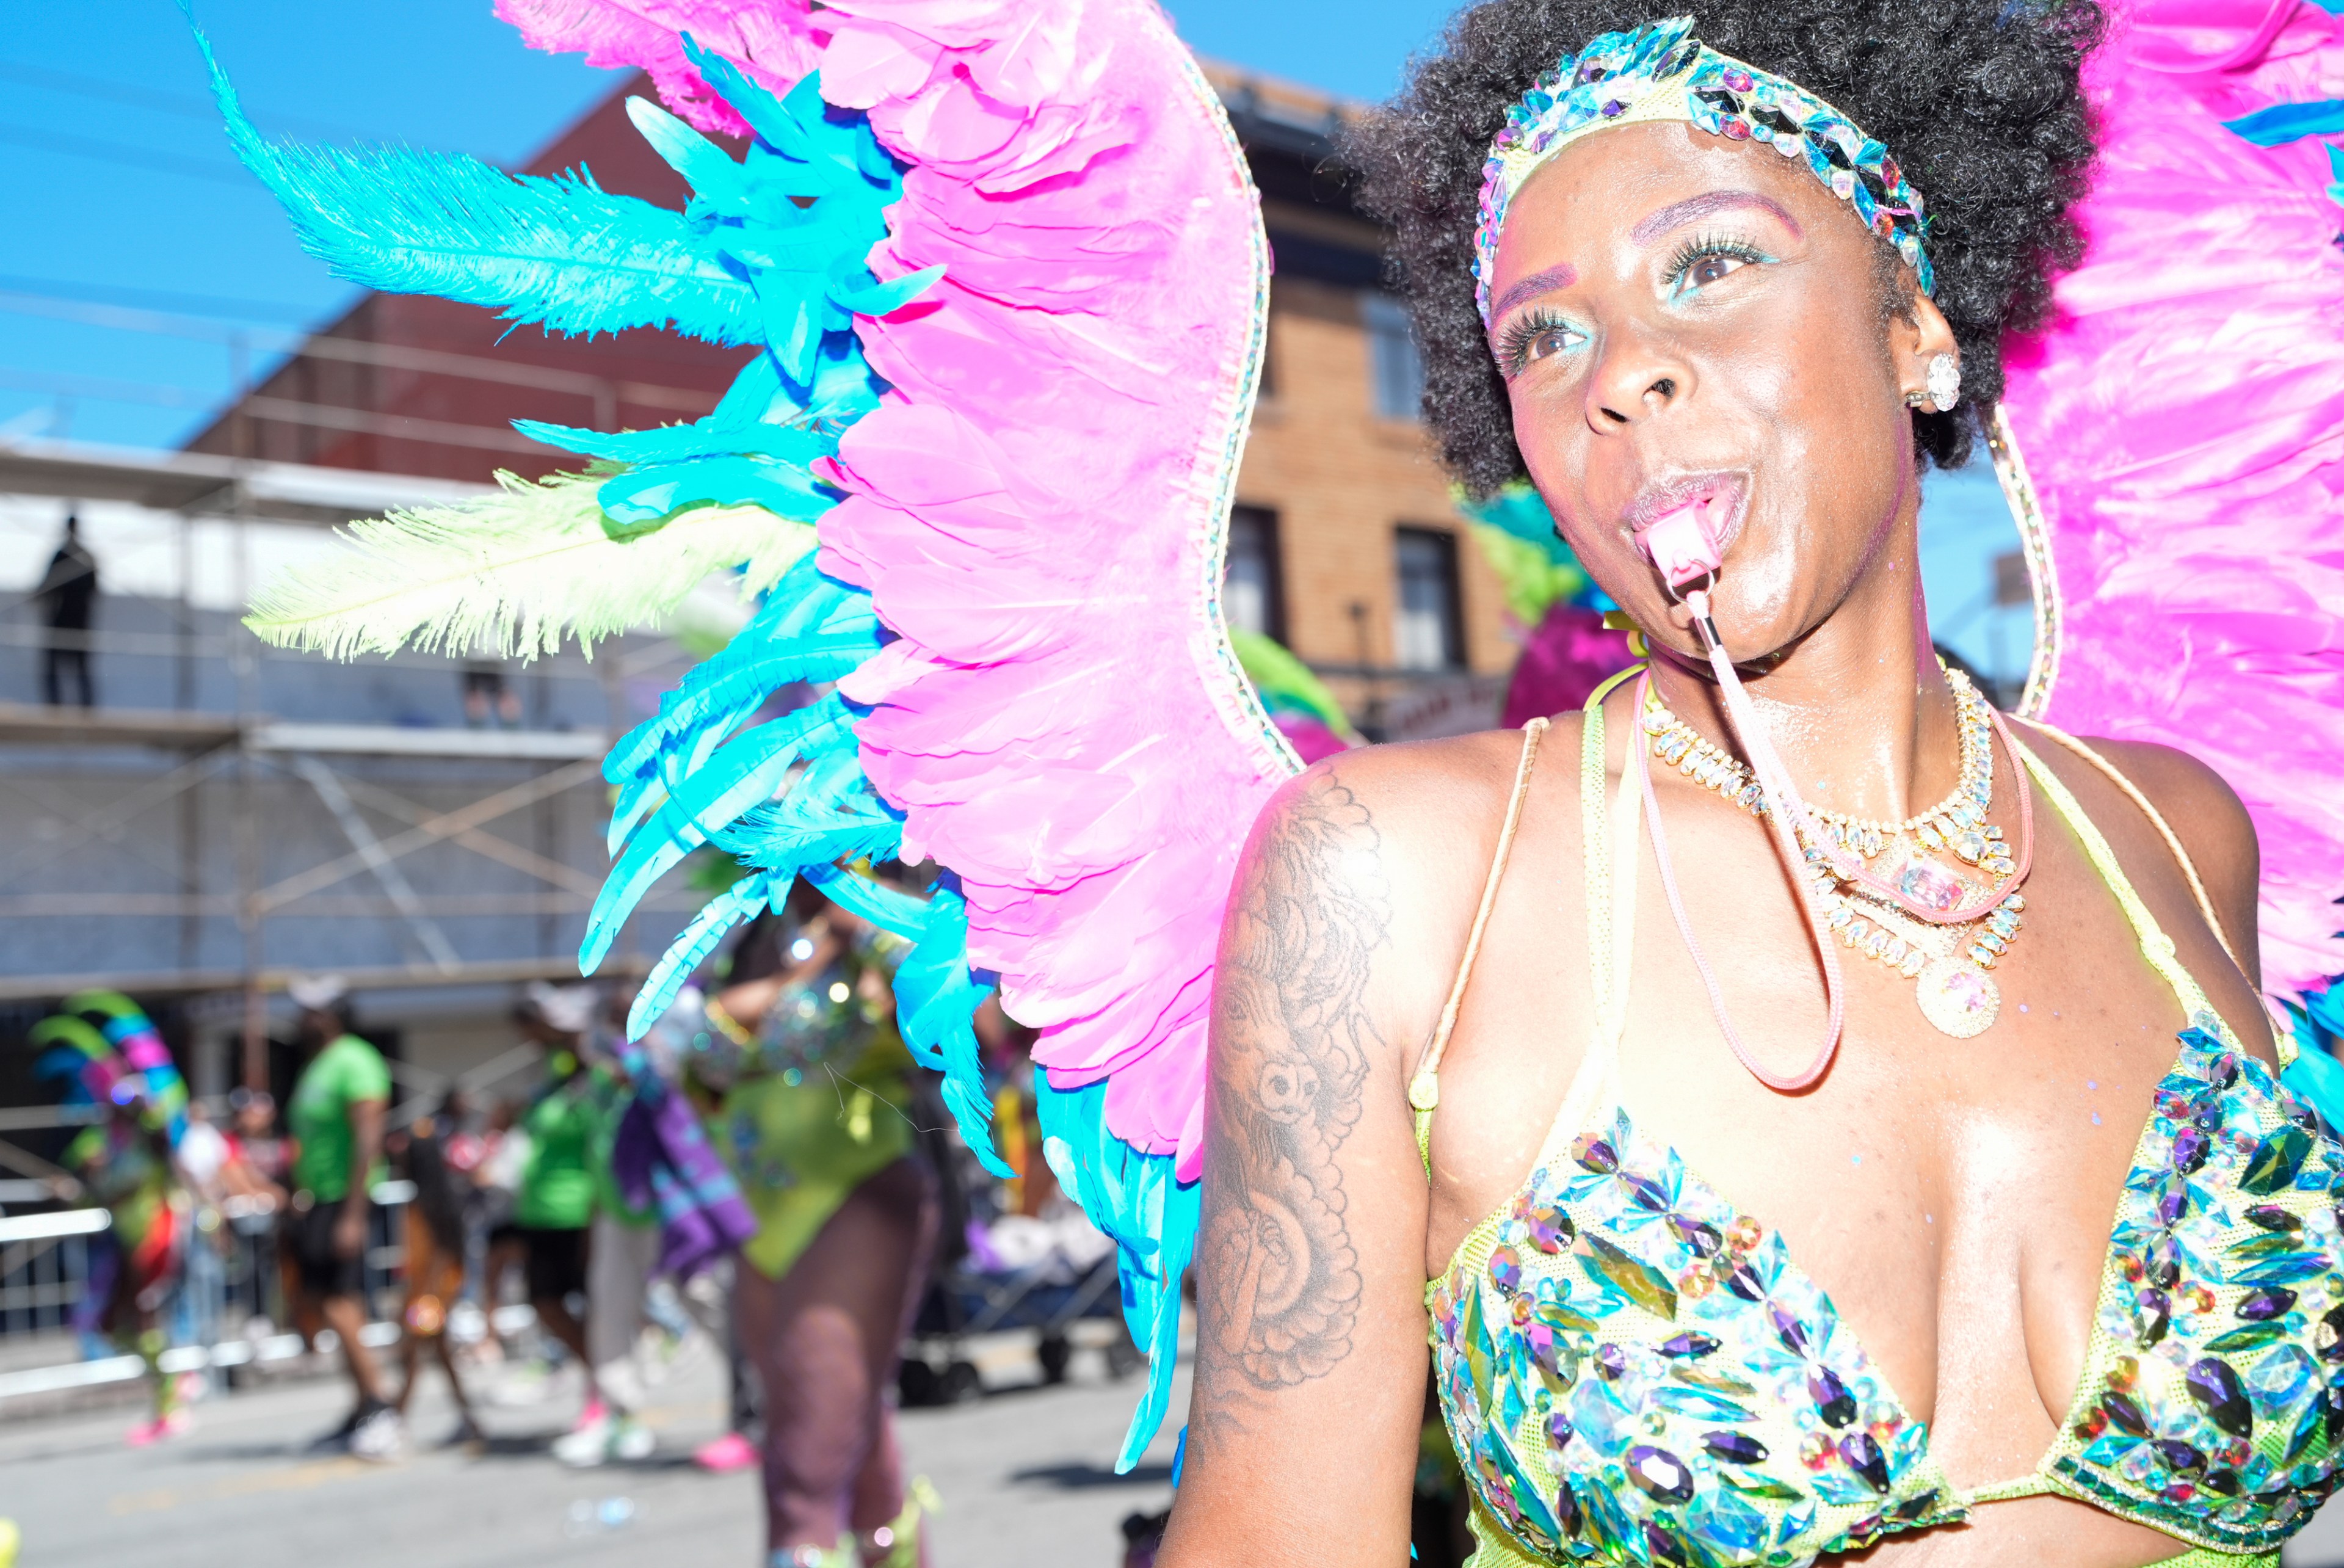 A person dressed in colorful carnival attire with large, vibrant pink and blue feathered wings is blowing a whistle. They have multiple necklaces and a sequined outfit.